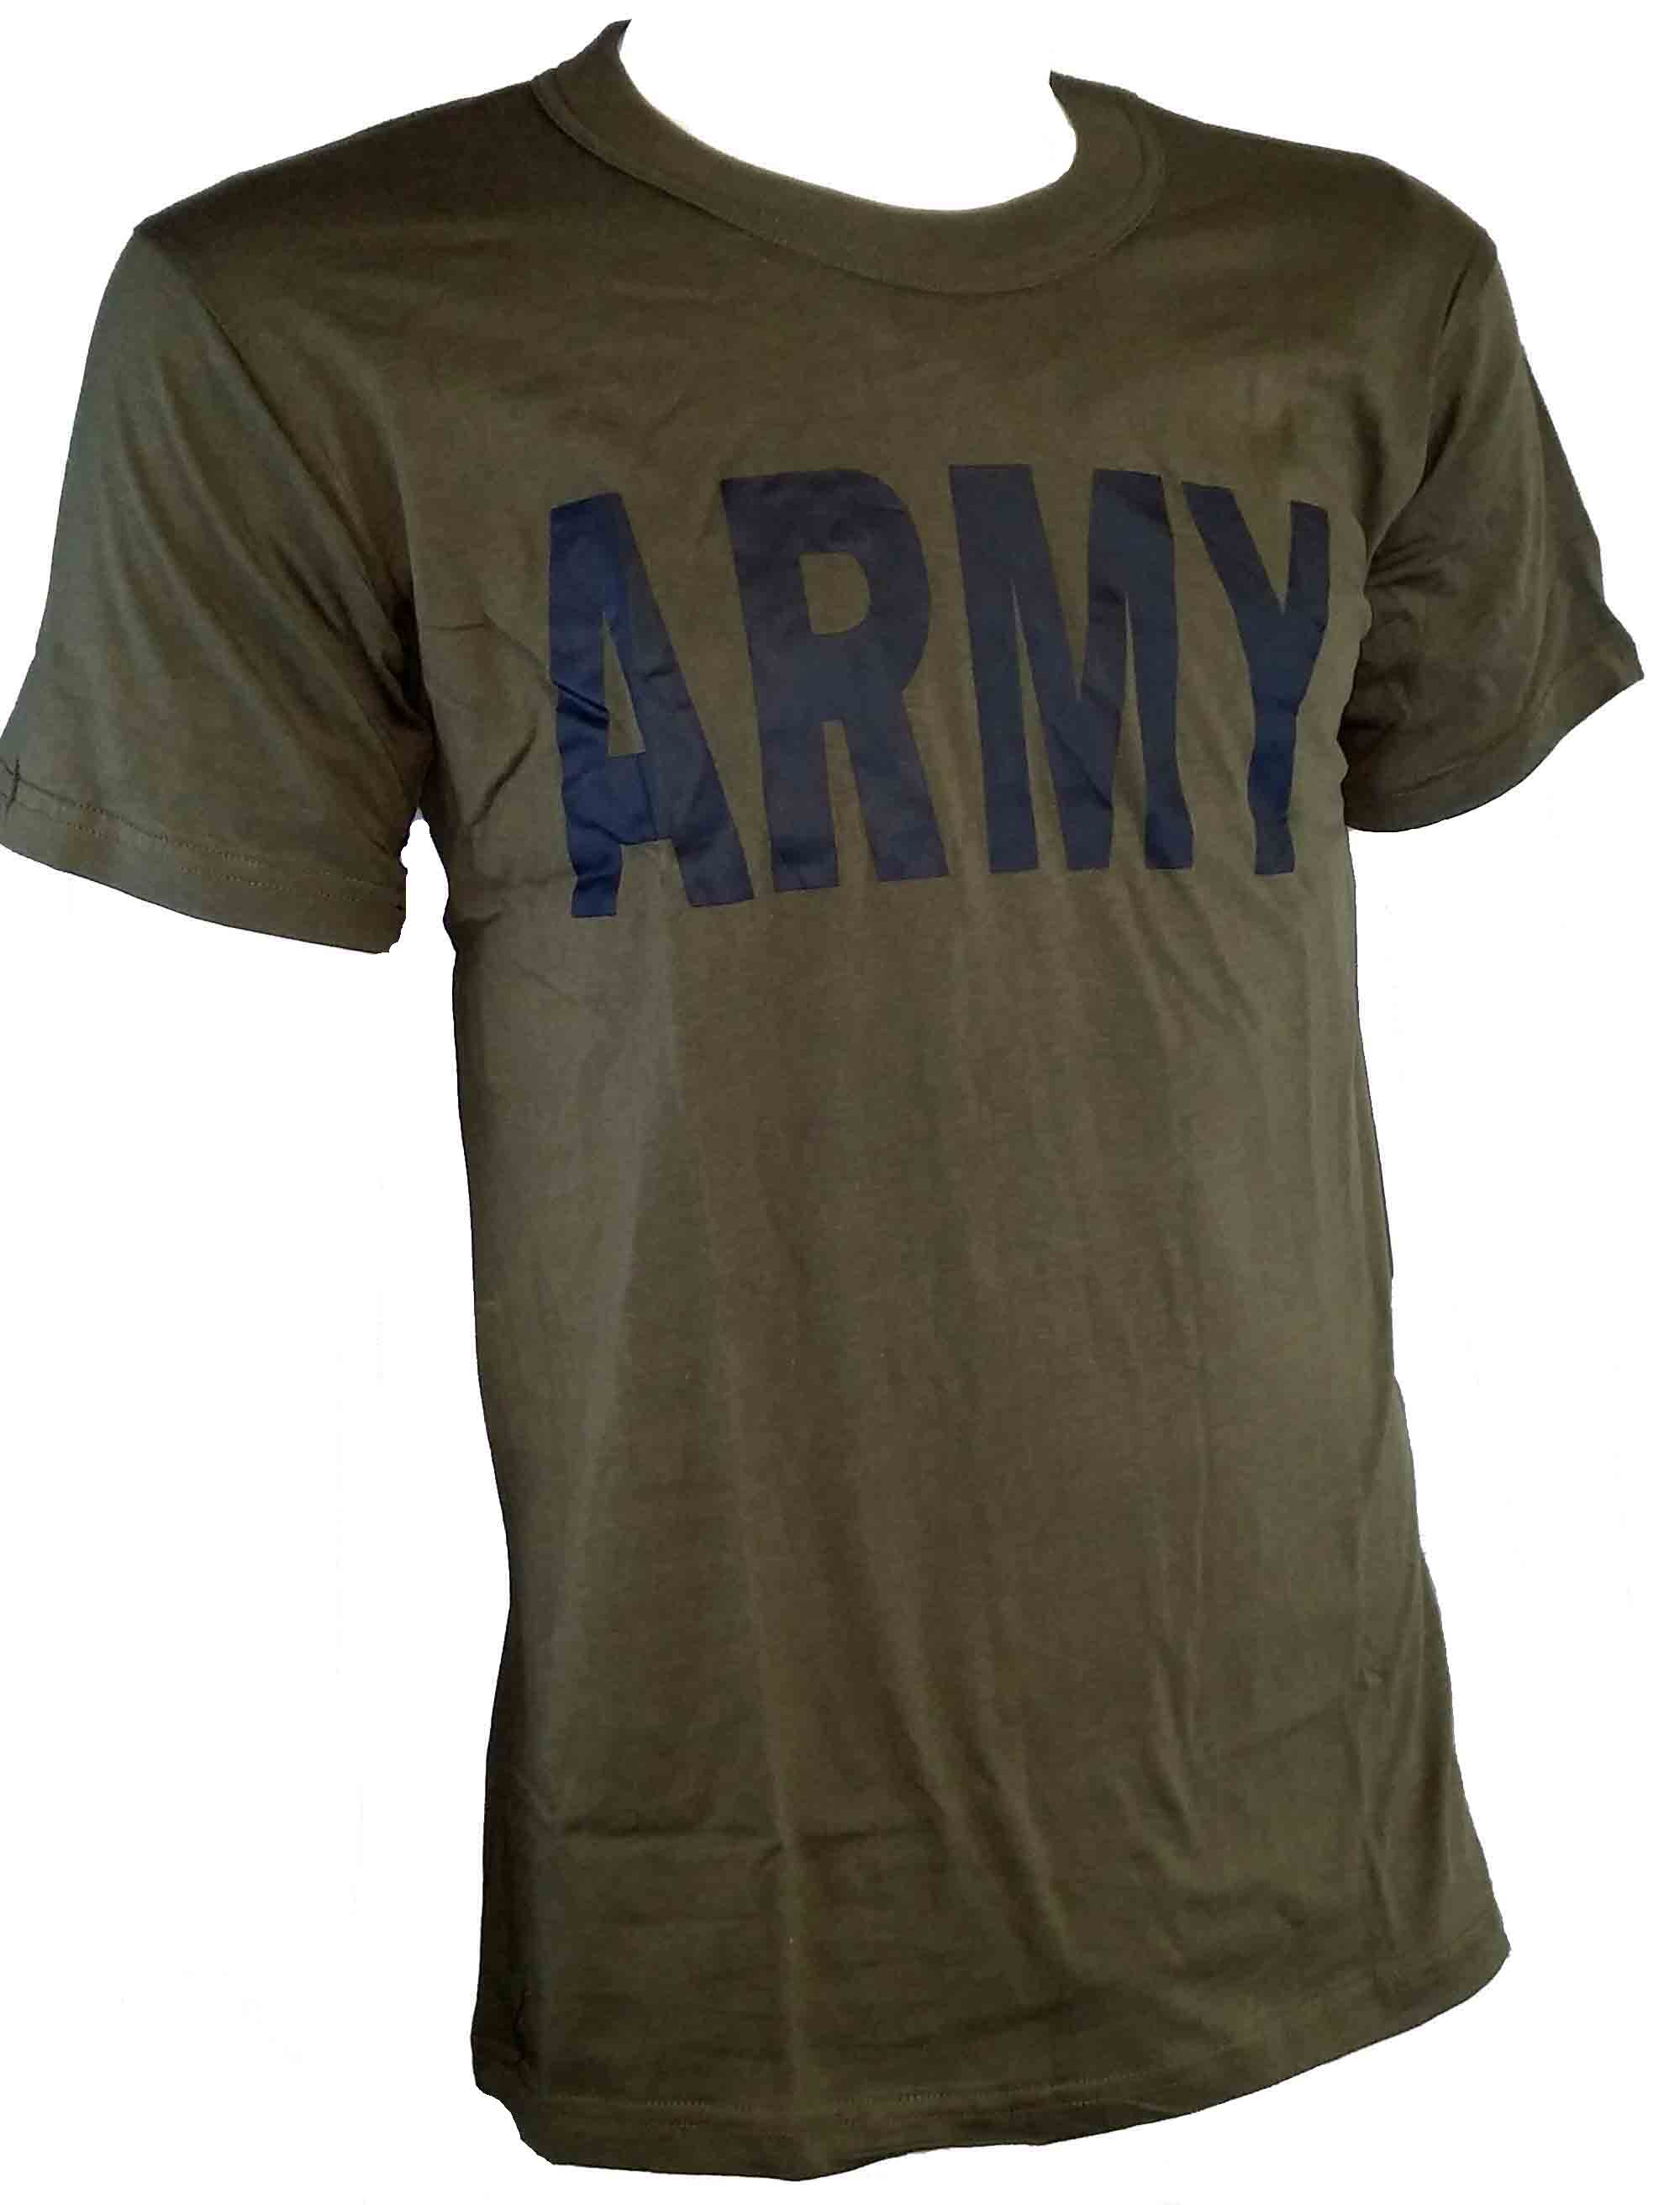 OLIVE DRAB T-SHIRT WITH ARMY LOGO